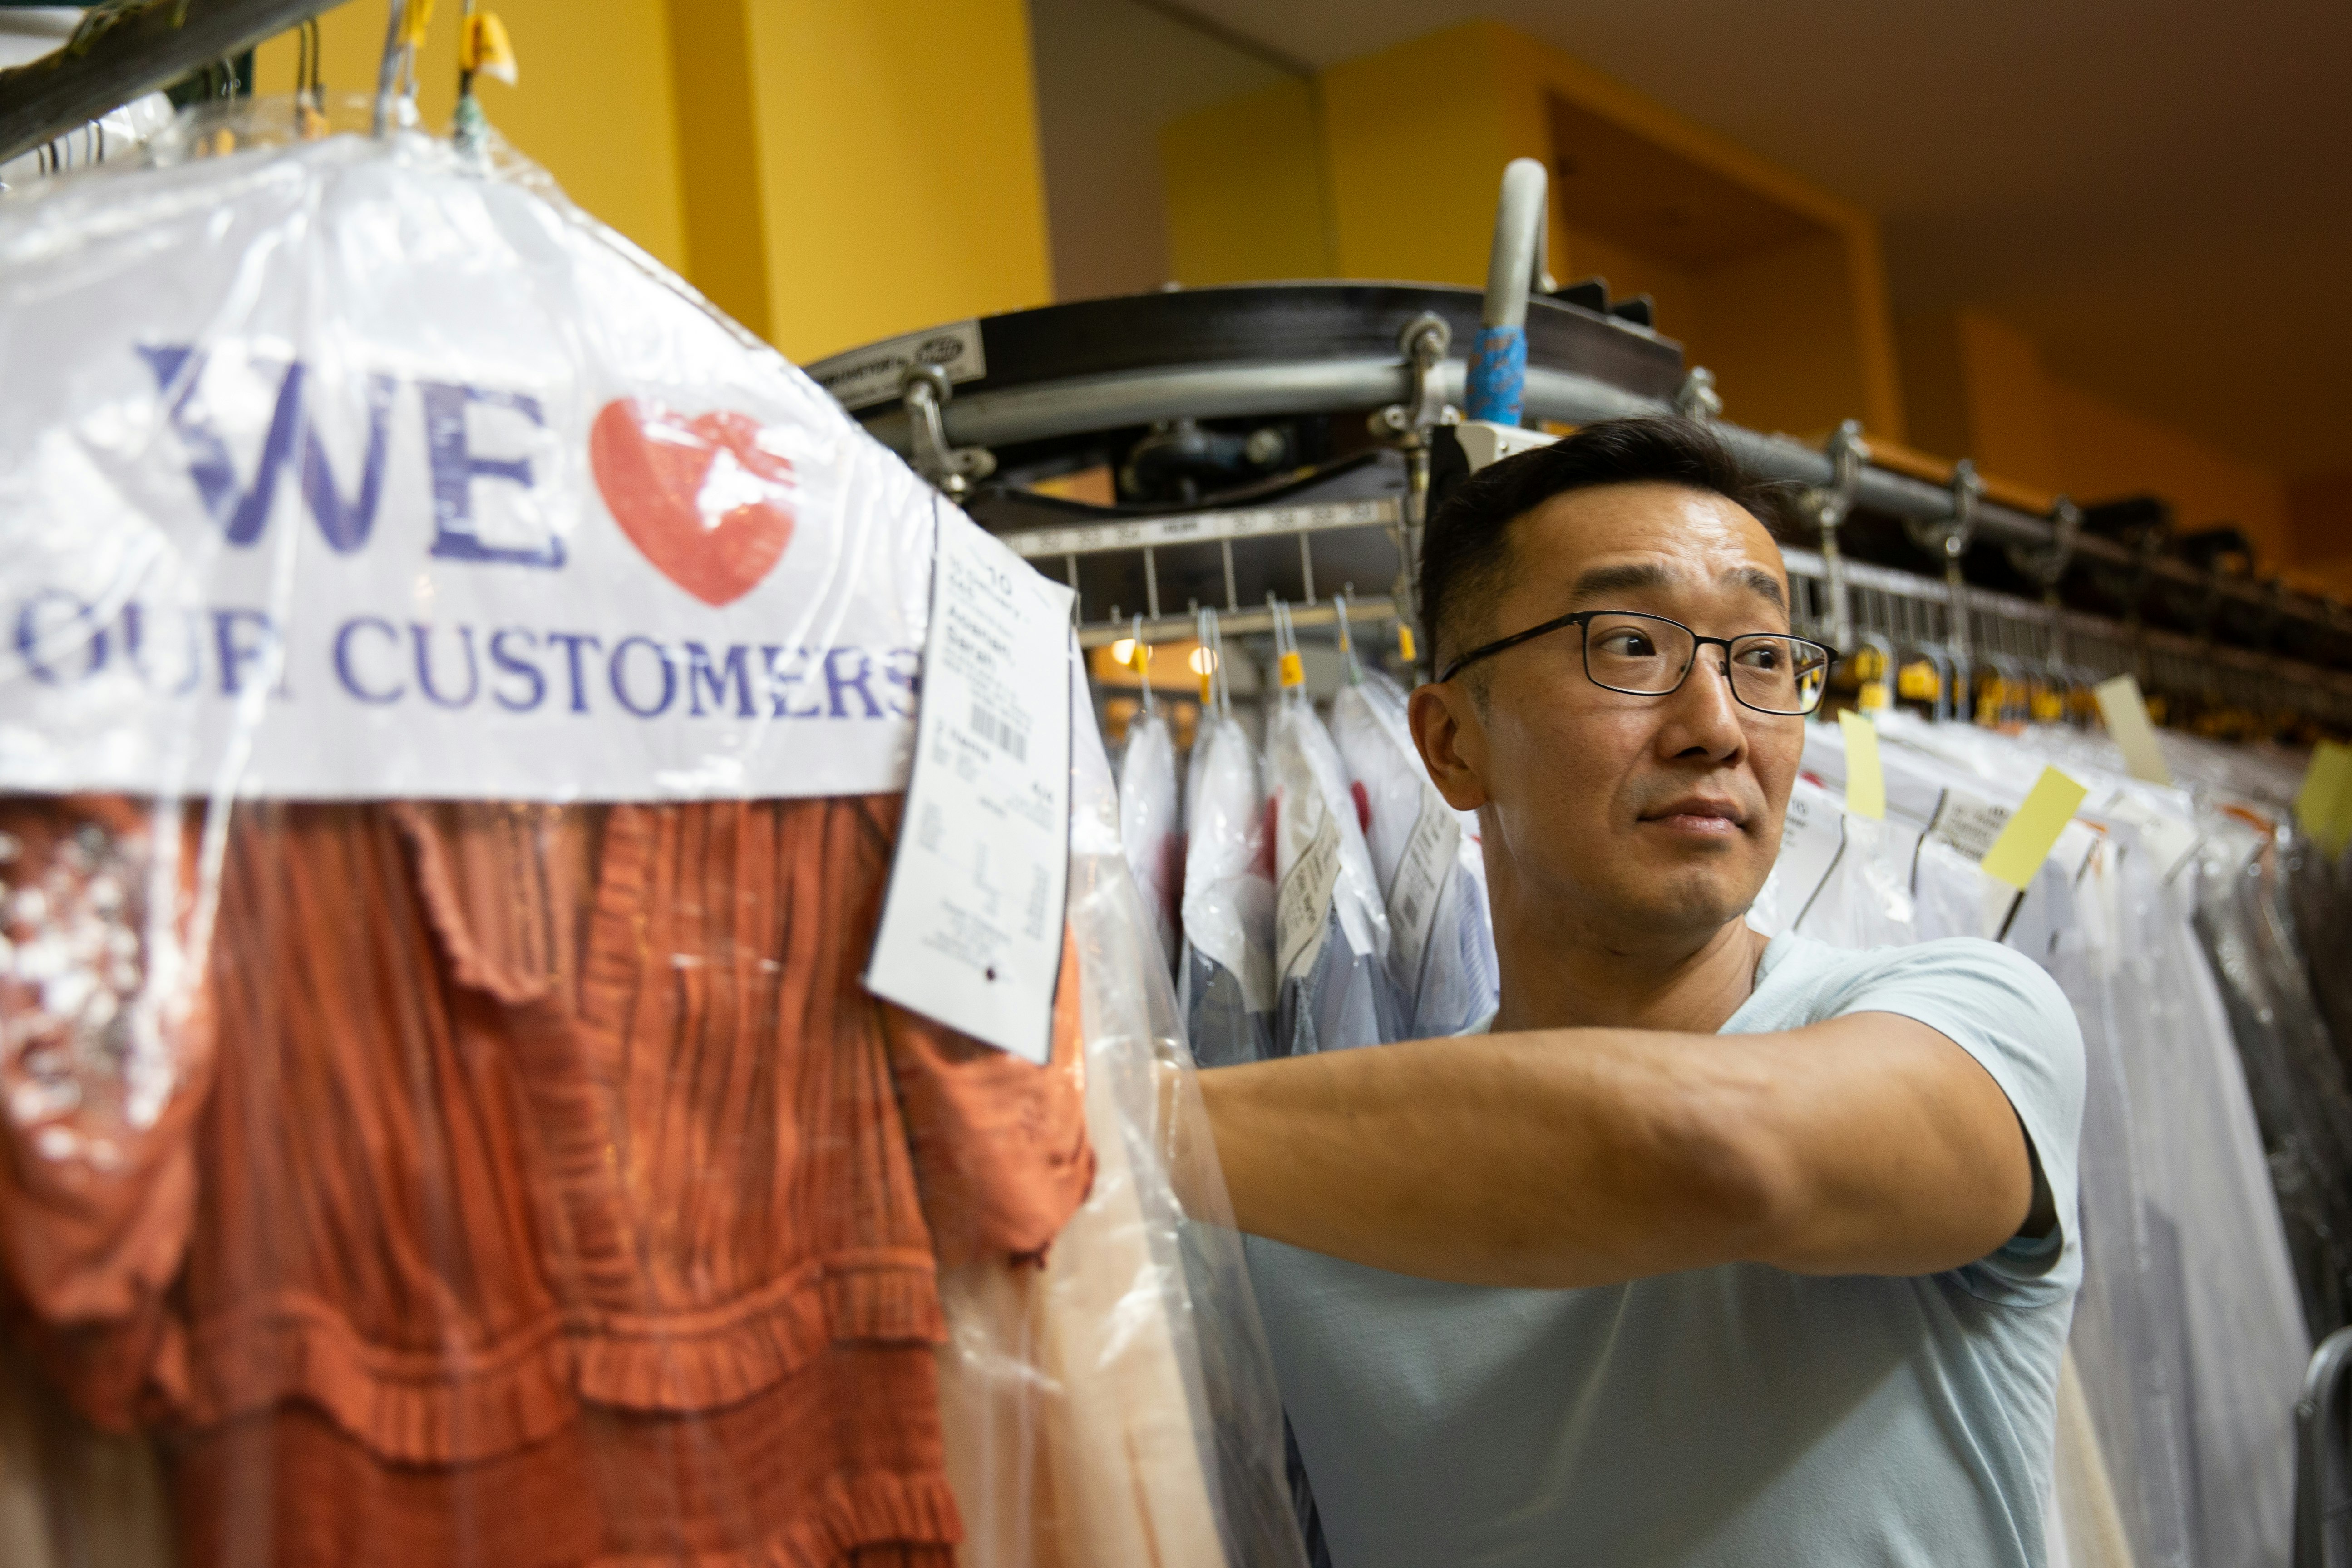 do dry cleaning business make money